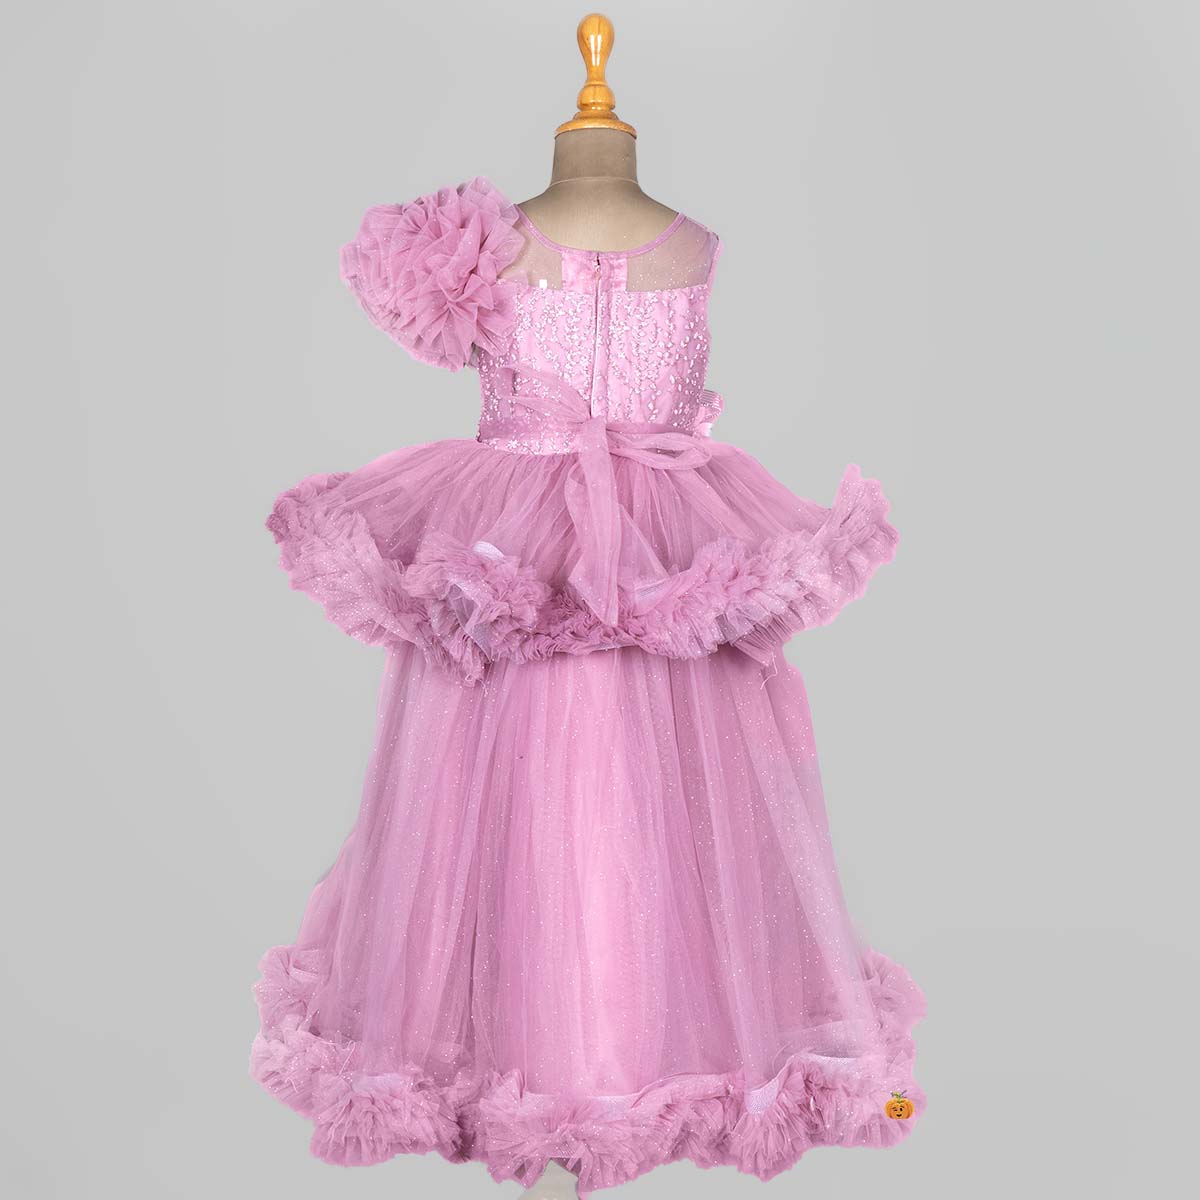 Girls Chinese folk fairy dance dresses costumes for kids children pink  princess ancient traditional dance drama cosplay dresses robes- Material:  Polyester( not stretchable fabric)Content : O